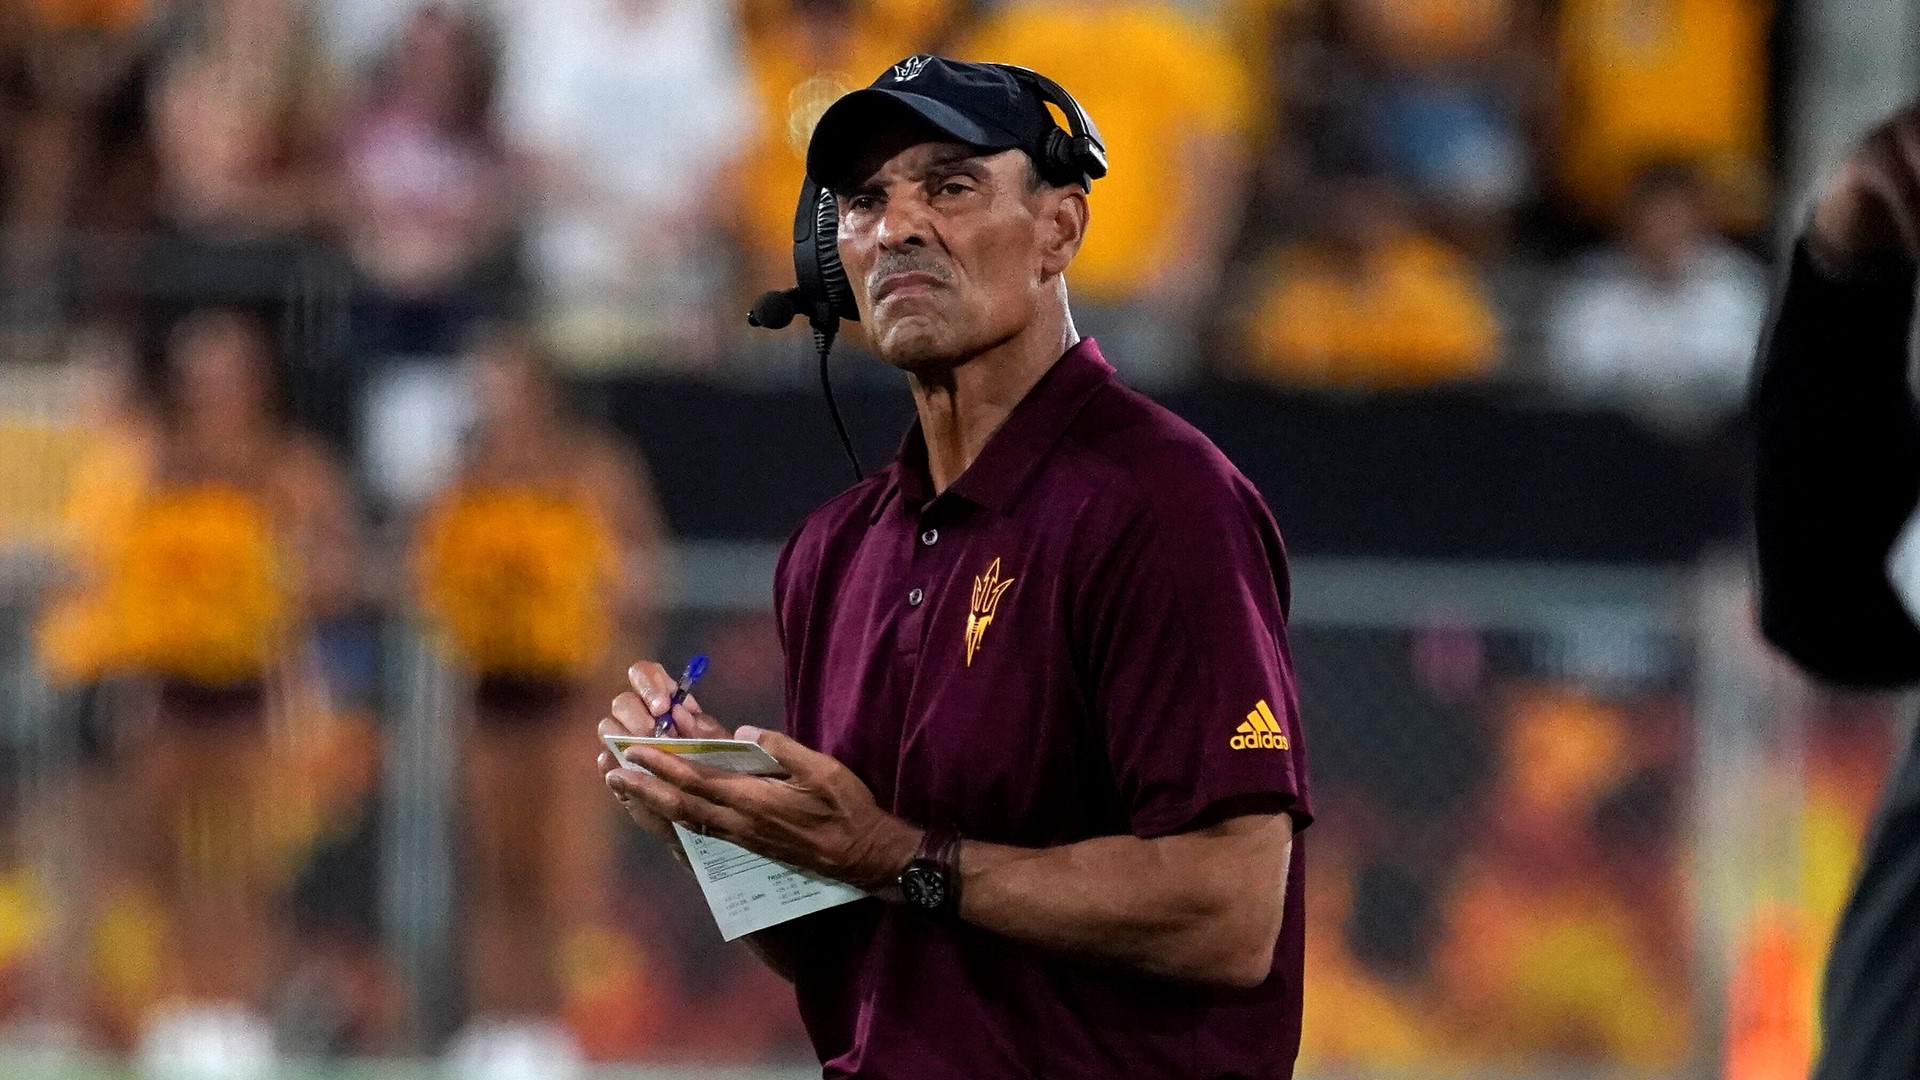 With Herm Edwards' departure from Tempe, the Sun Devils now embark on finding their next head football coach.